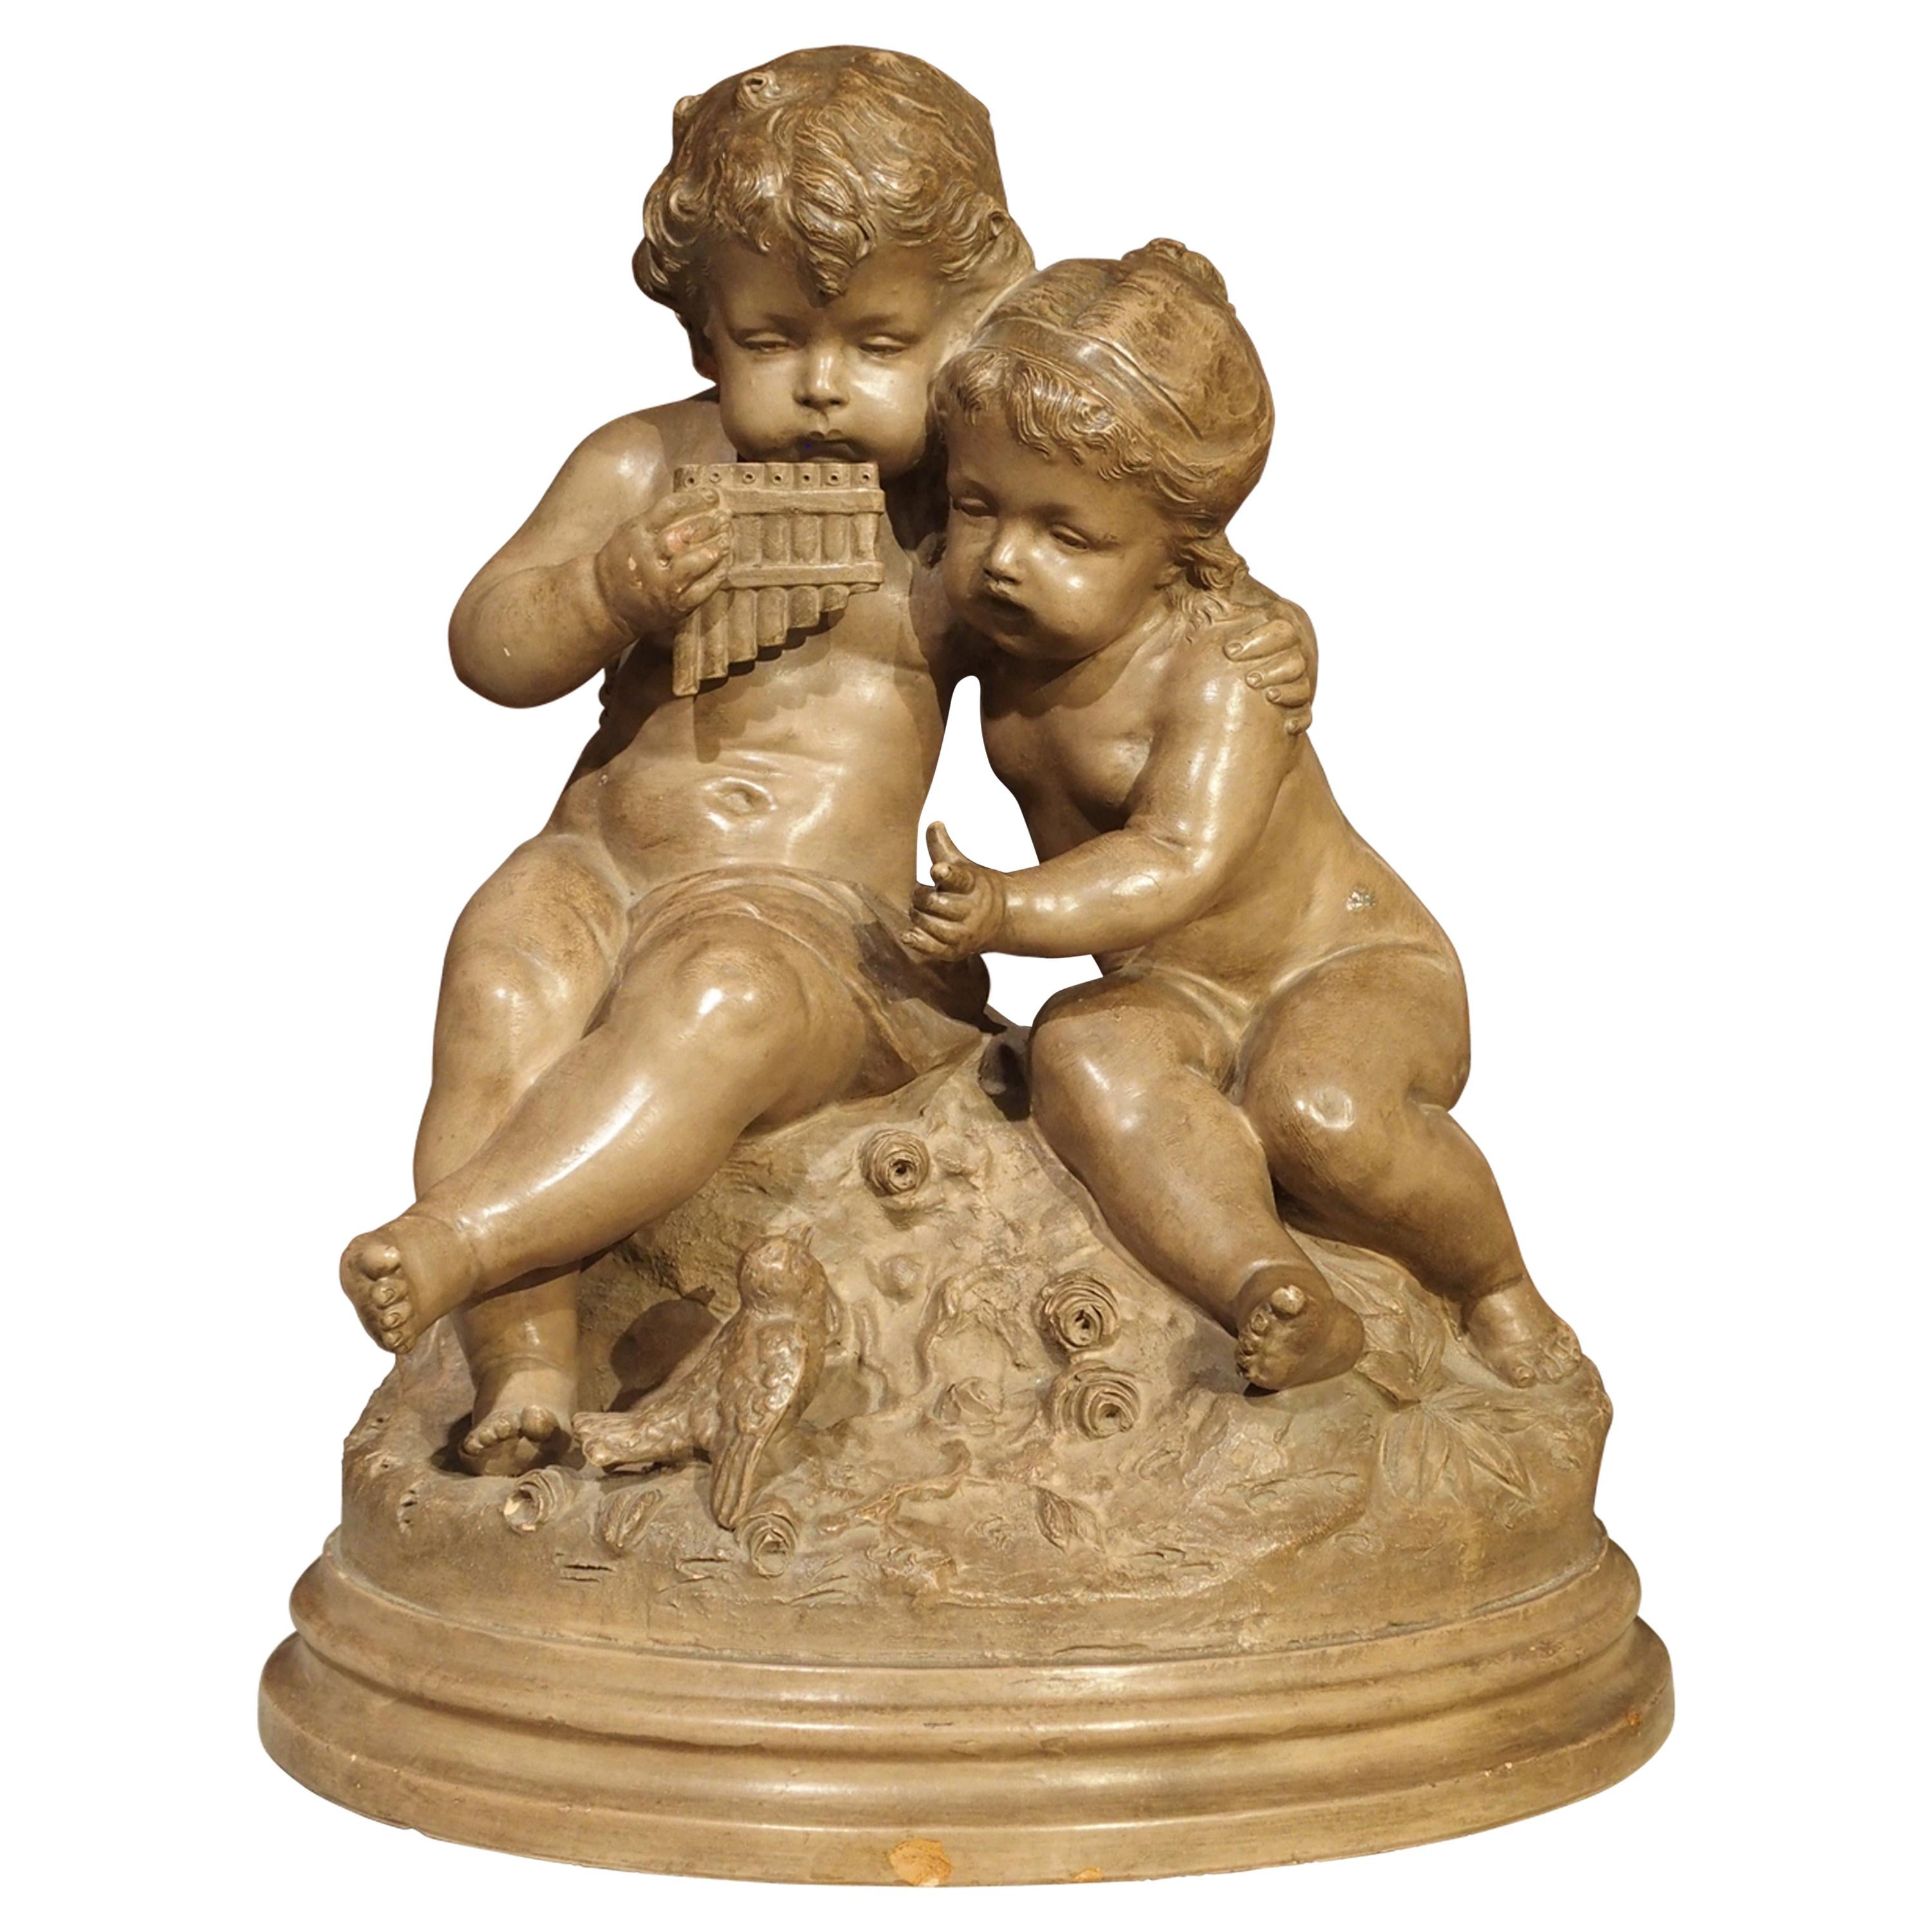 Antique Terracotta of a Boy and Girl, France, Early 1900s